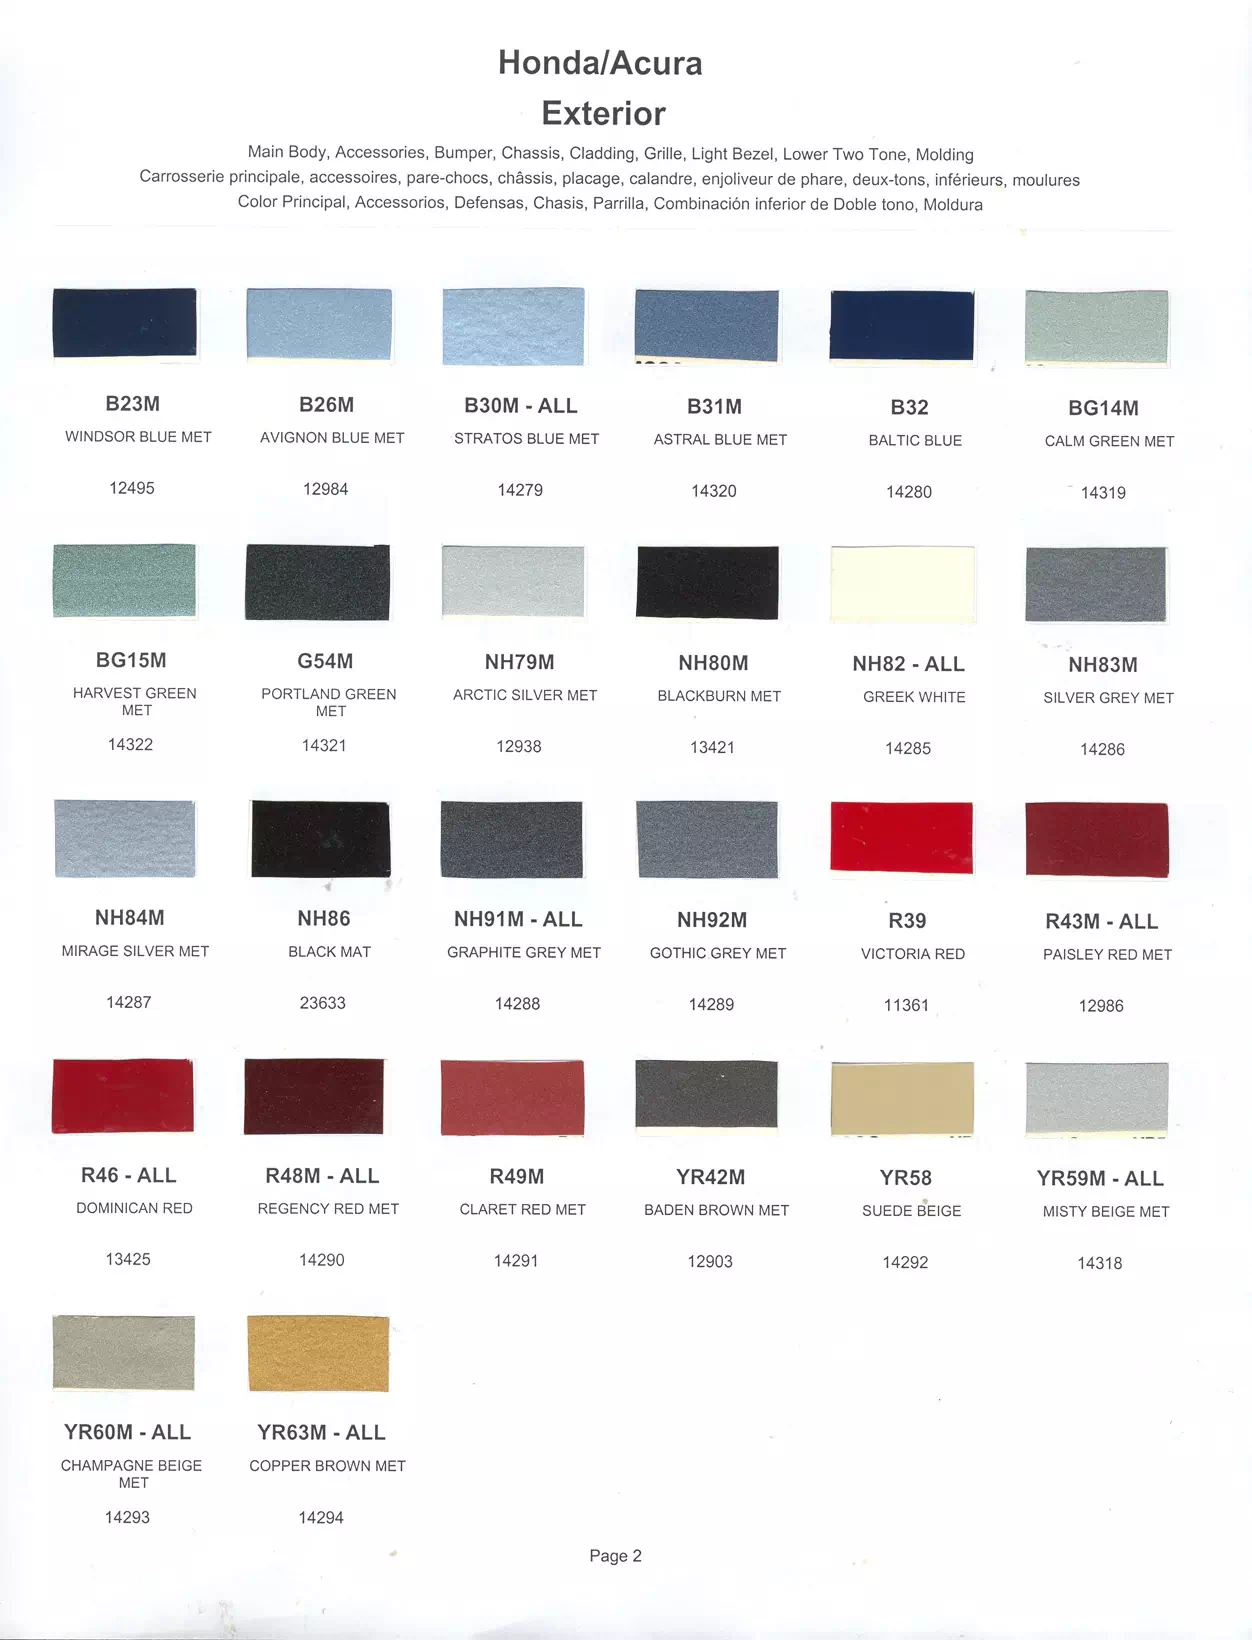 Exterior paint chips and their ordering codes for Honda Vehicles